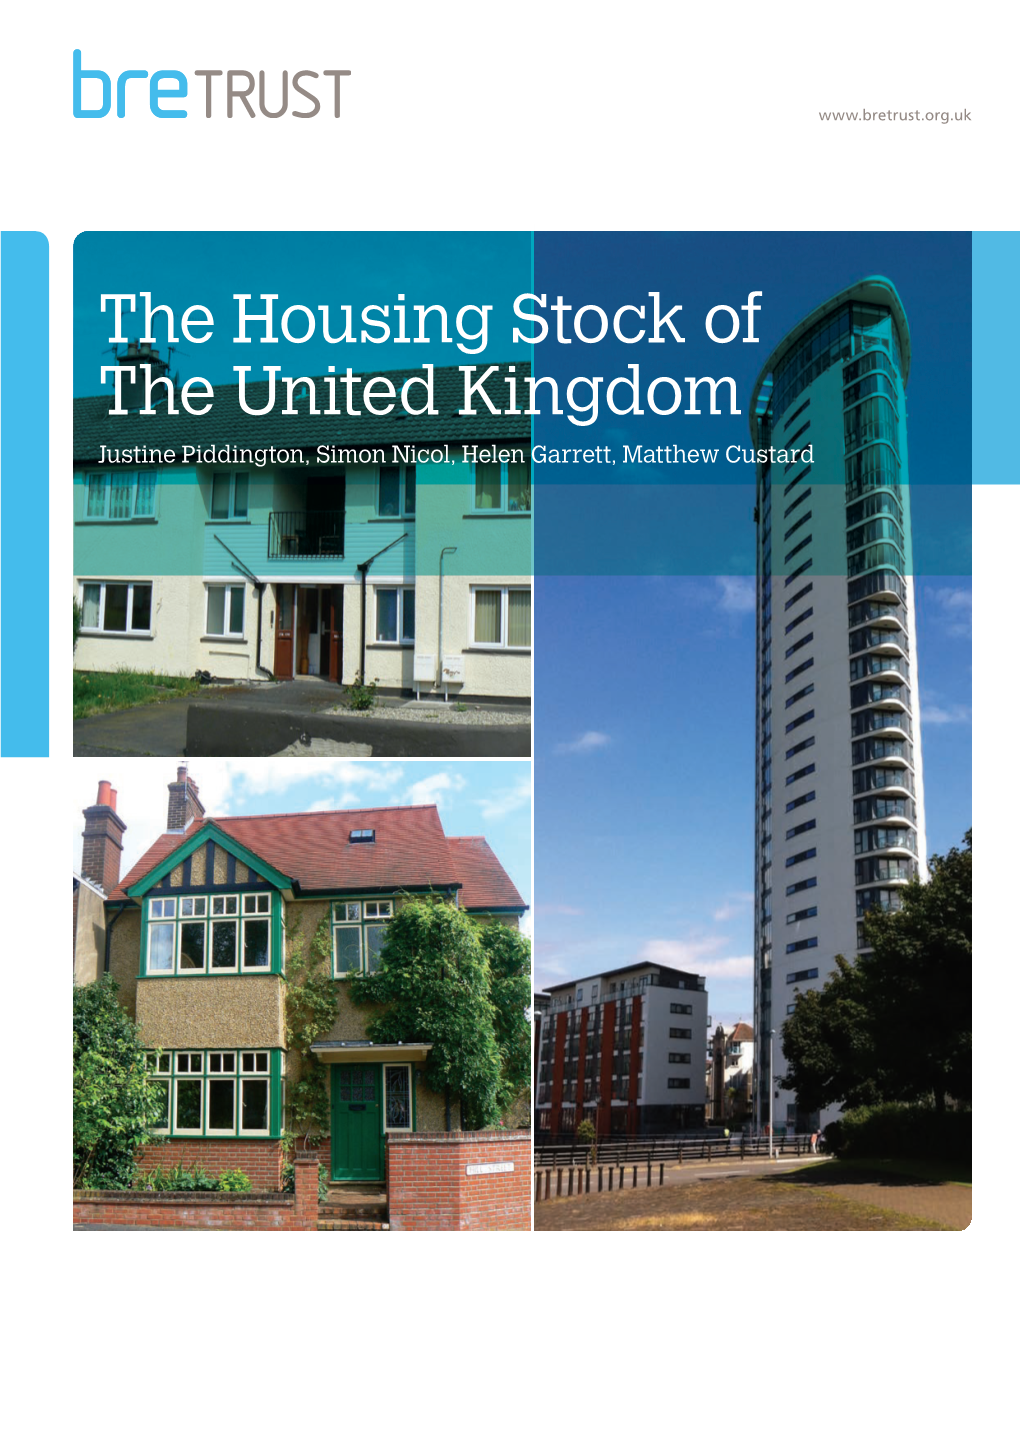 The Housing Stock of the United Kingdom